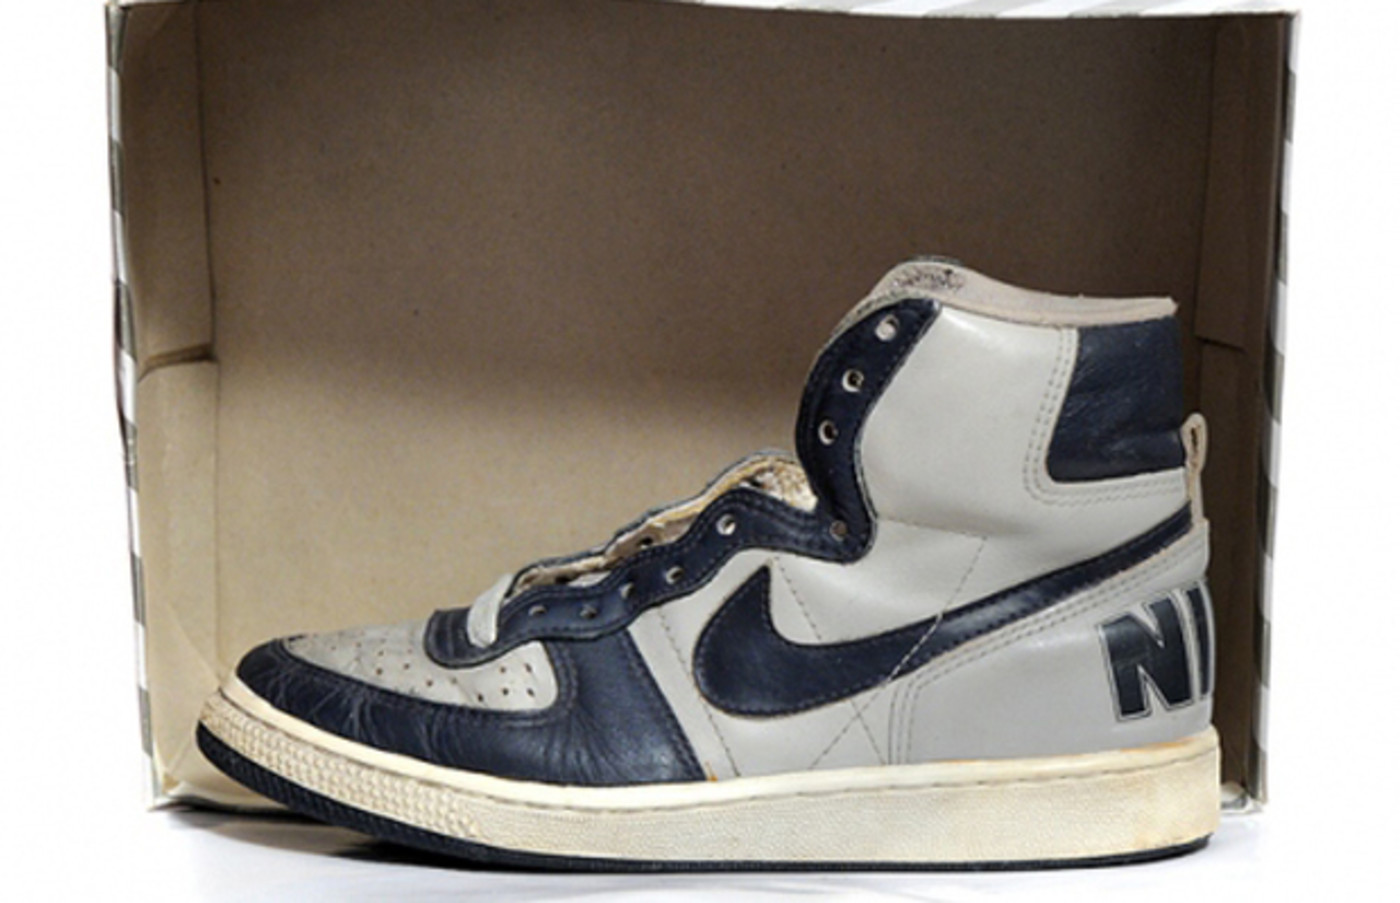 The 80 Greatest Sneakers of the '80s 